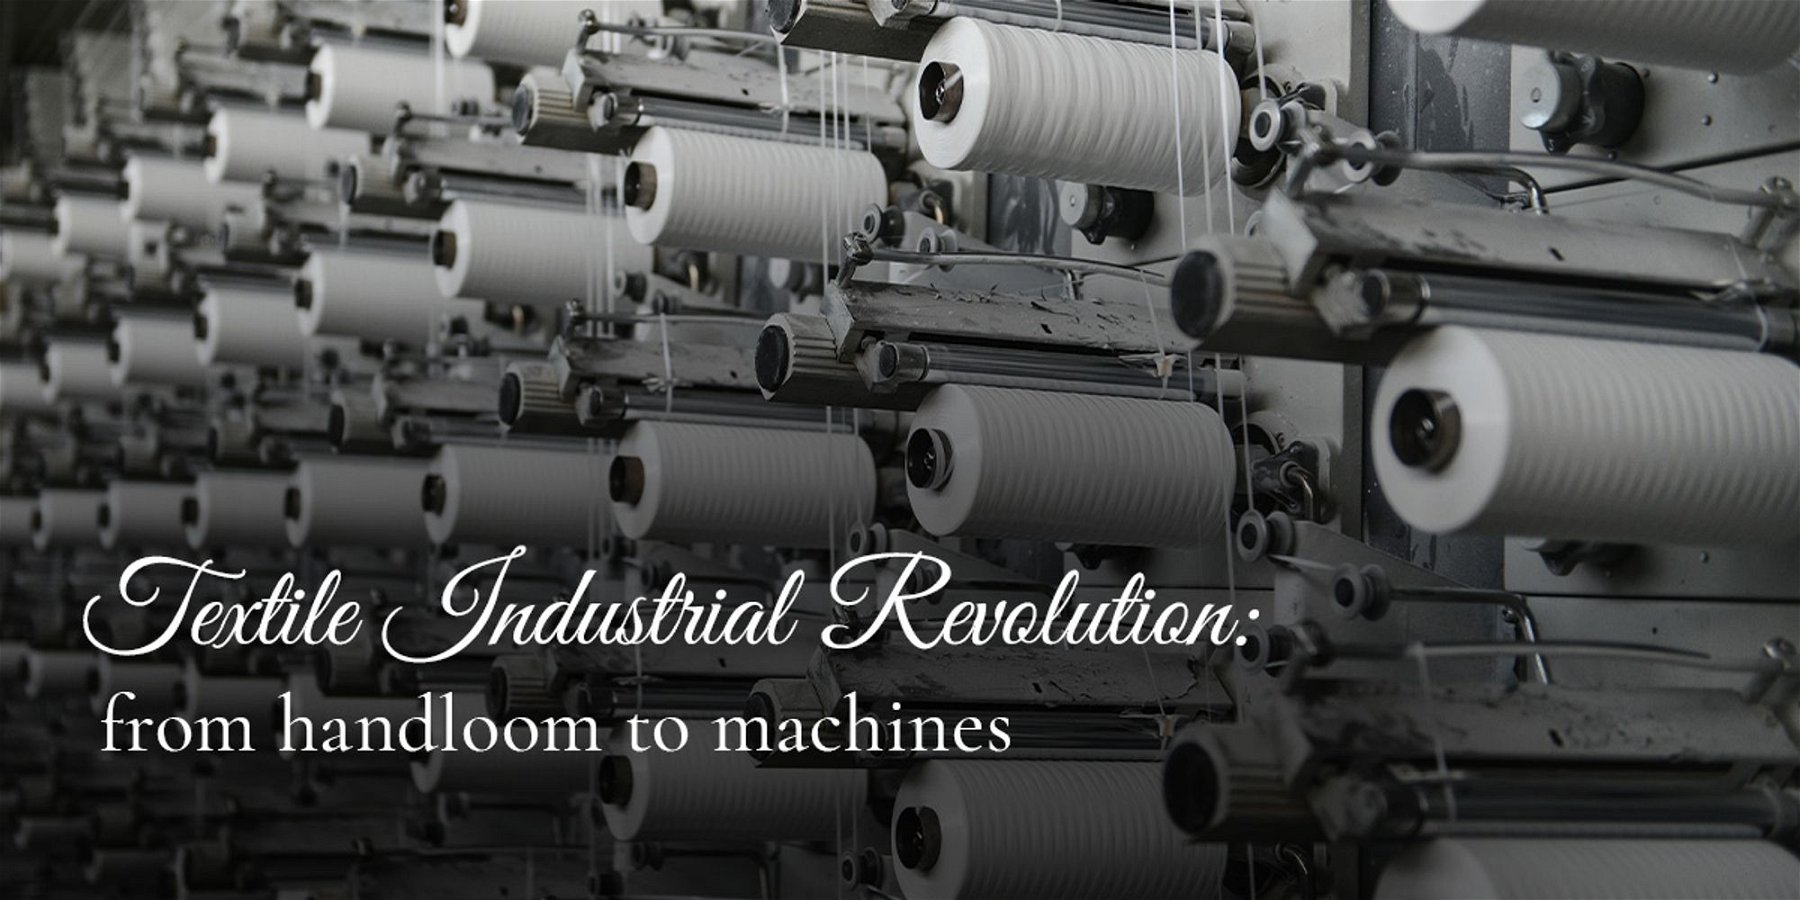 Textile industrial revolution: From handloom to machines